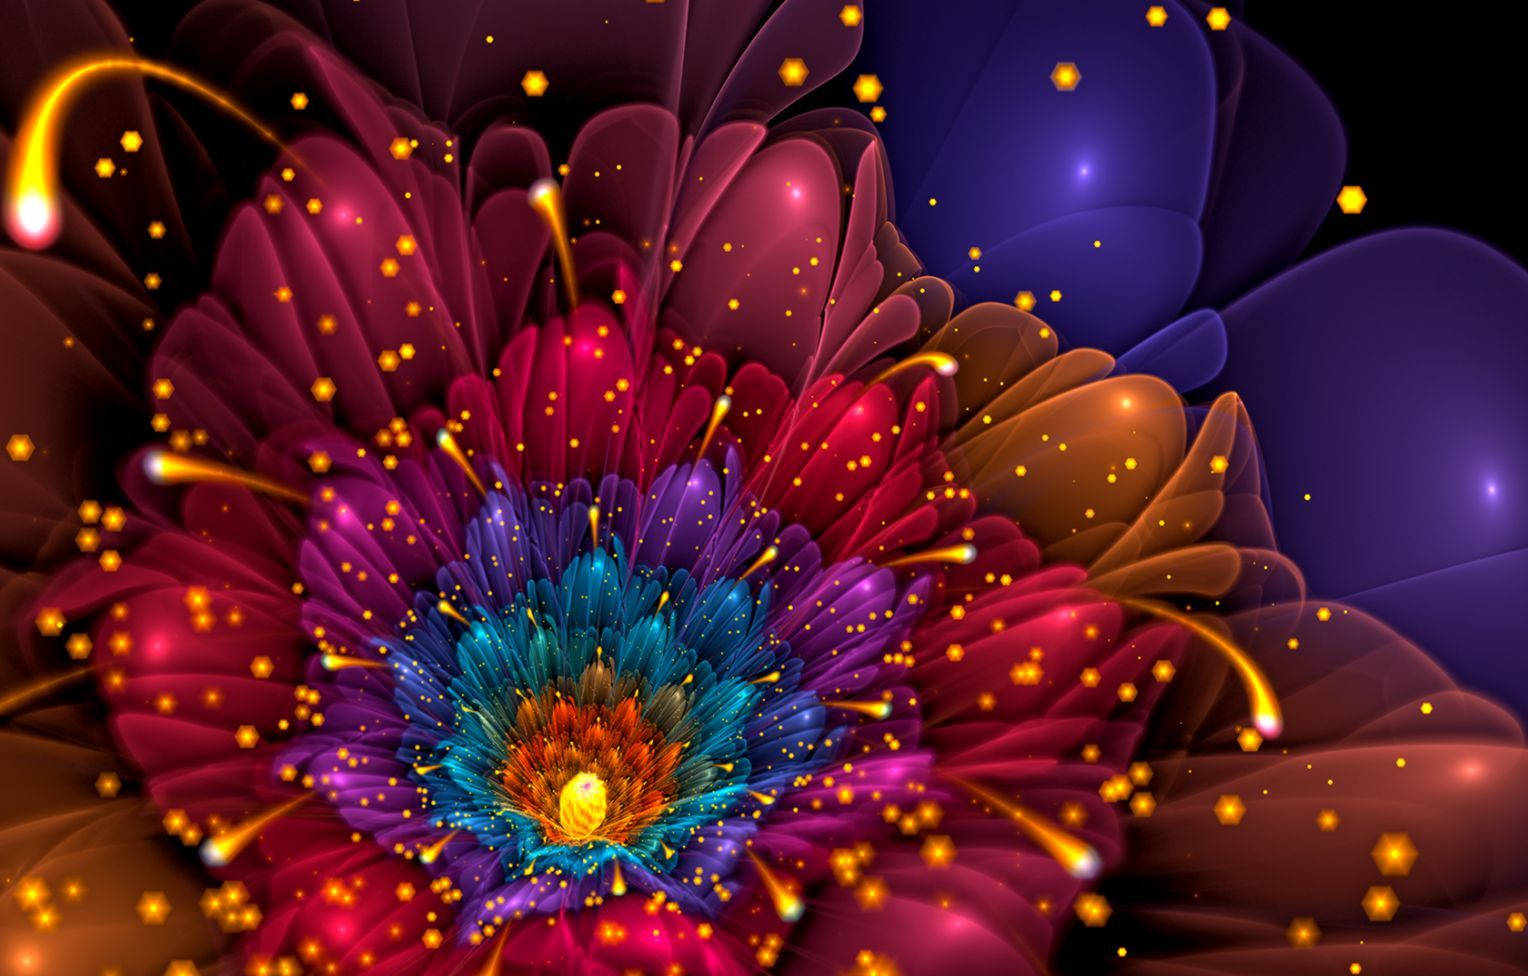 Sparkly Psychedelic Flower Wallpaper